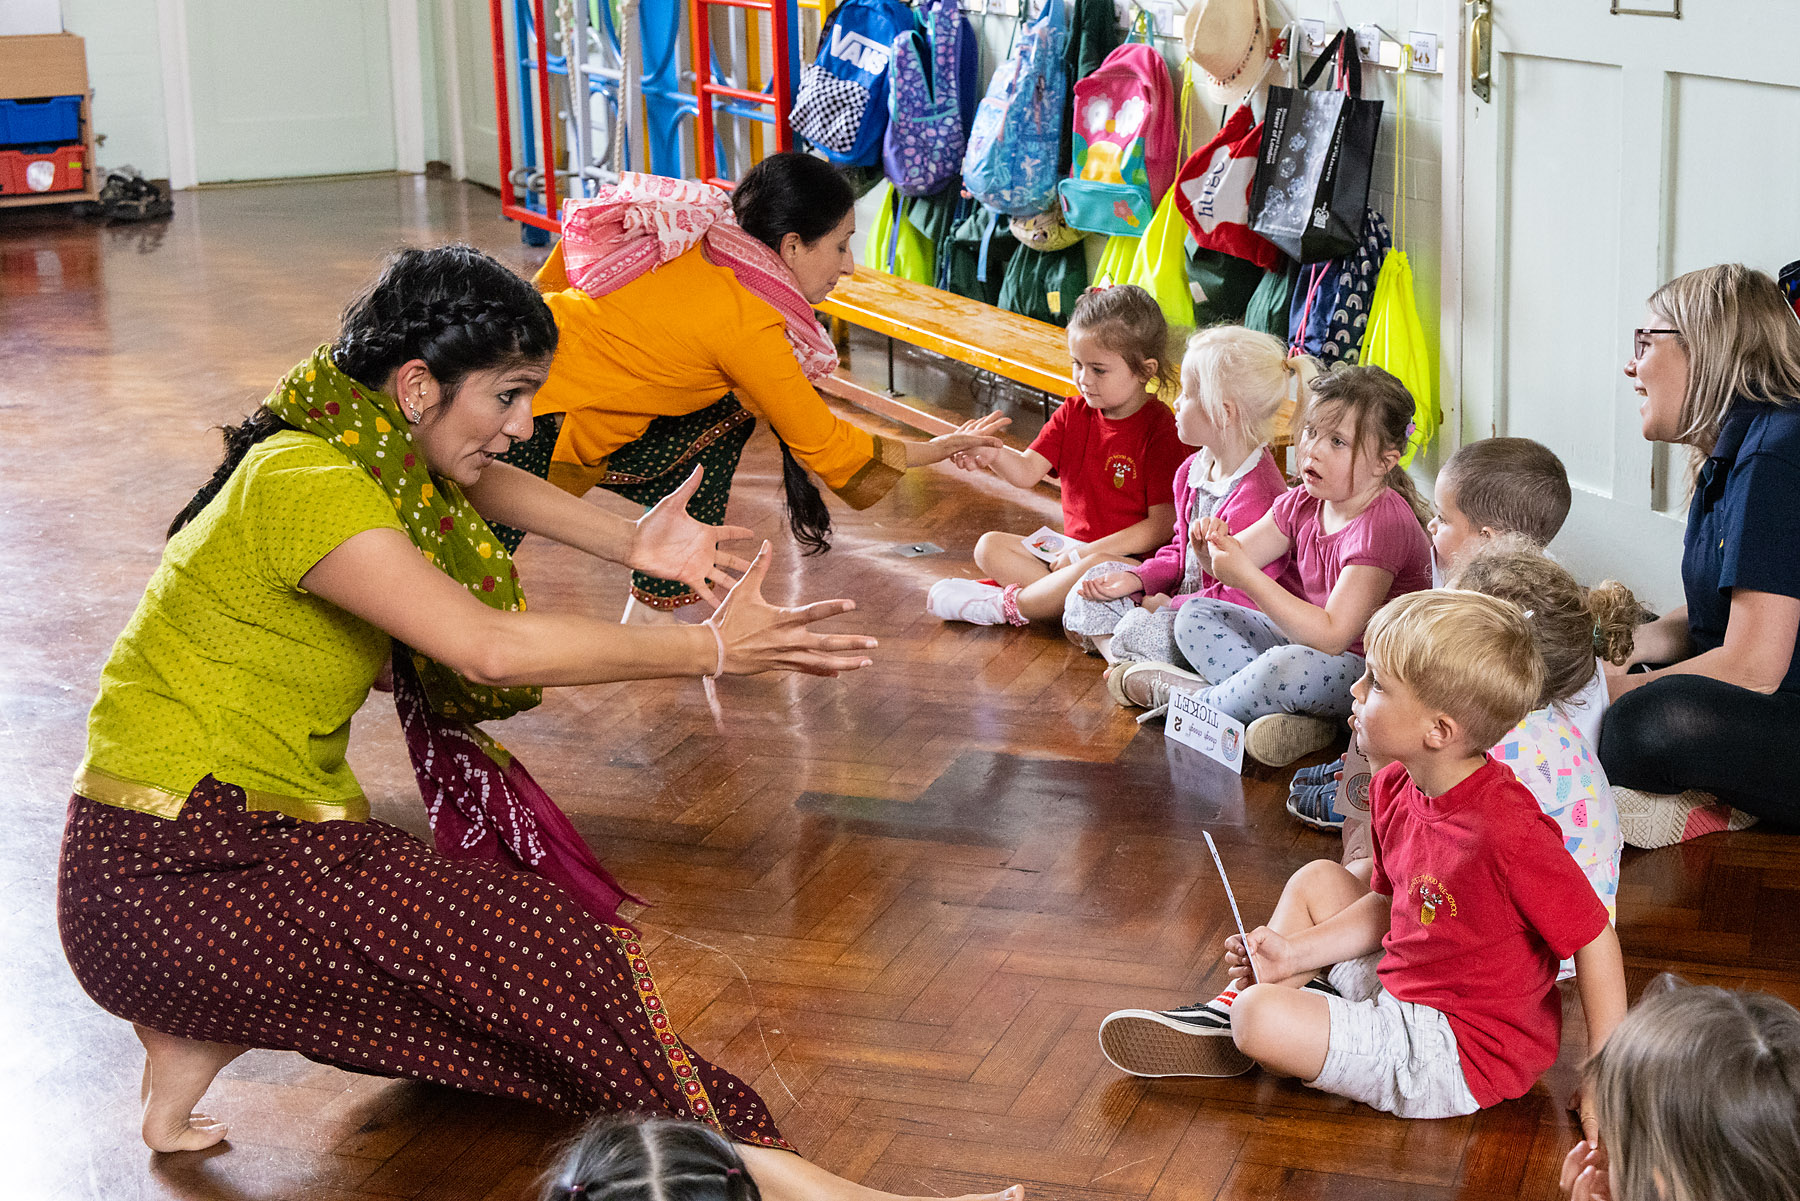 Two women of South Asian heritage are dressed in traditional South Asian clothing. They are knelt down on the floor in front of a row of school children. Their hands point towards the children as the children gae back at the performers.